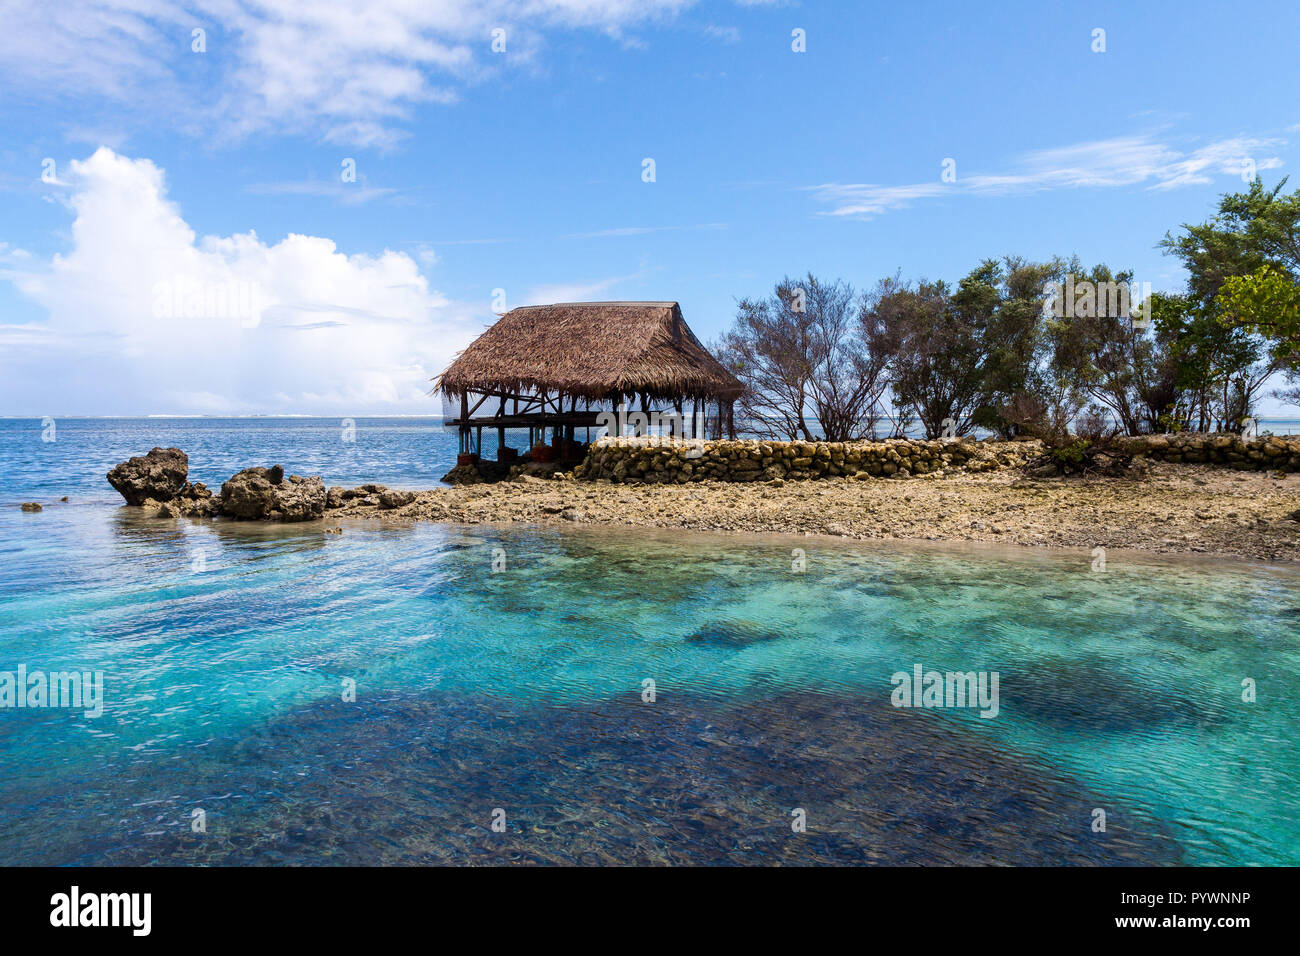 Traditional bungalow of native aborigines Micronesian people. Reef coral island motu. Blue azure turquoise lagoon with corals. Pohnpei island, Micronesia, Federated States of Micronesia (FSM), Oceania Stock Photo